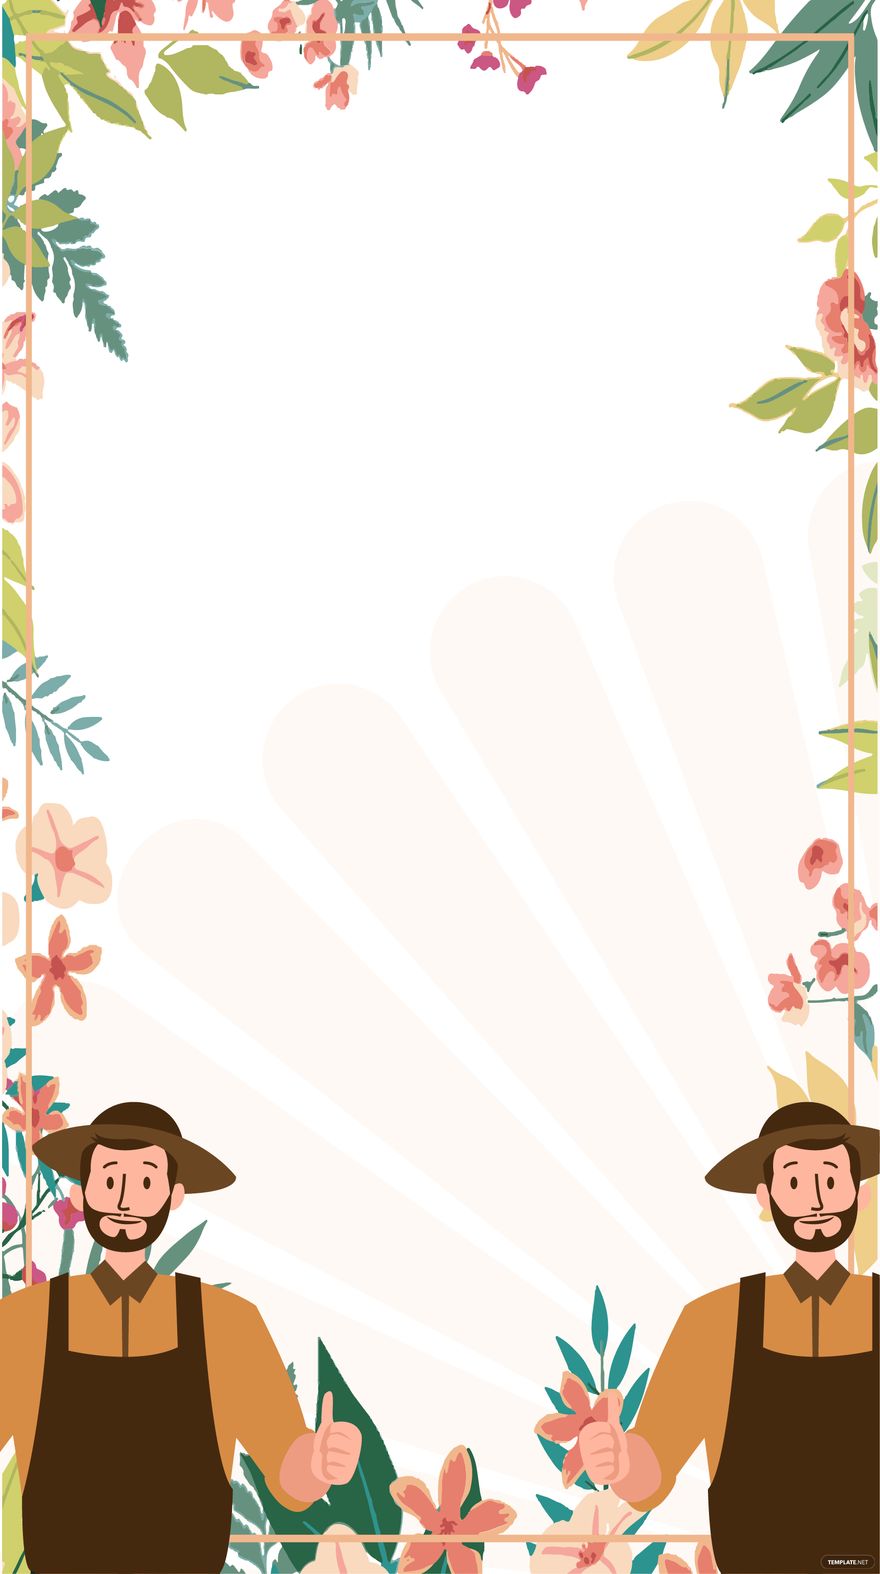 Farmers Day iPhone Background in PDF, Illustrator, PSD, EPS, SVG, JPG, PNG